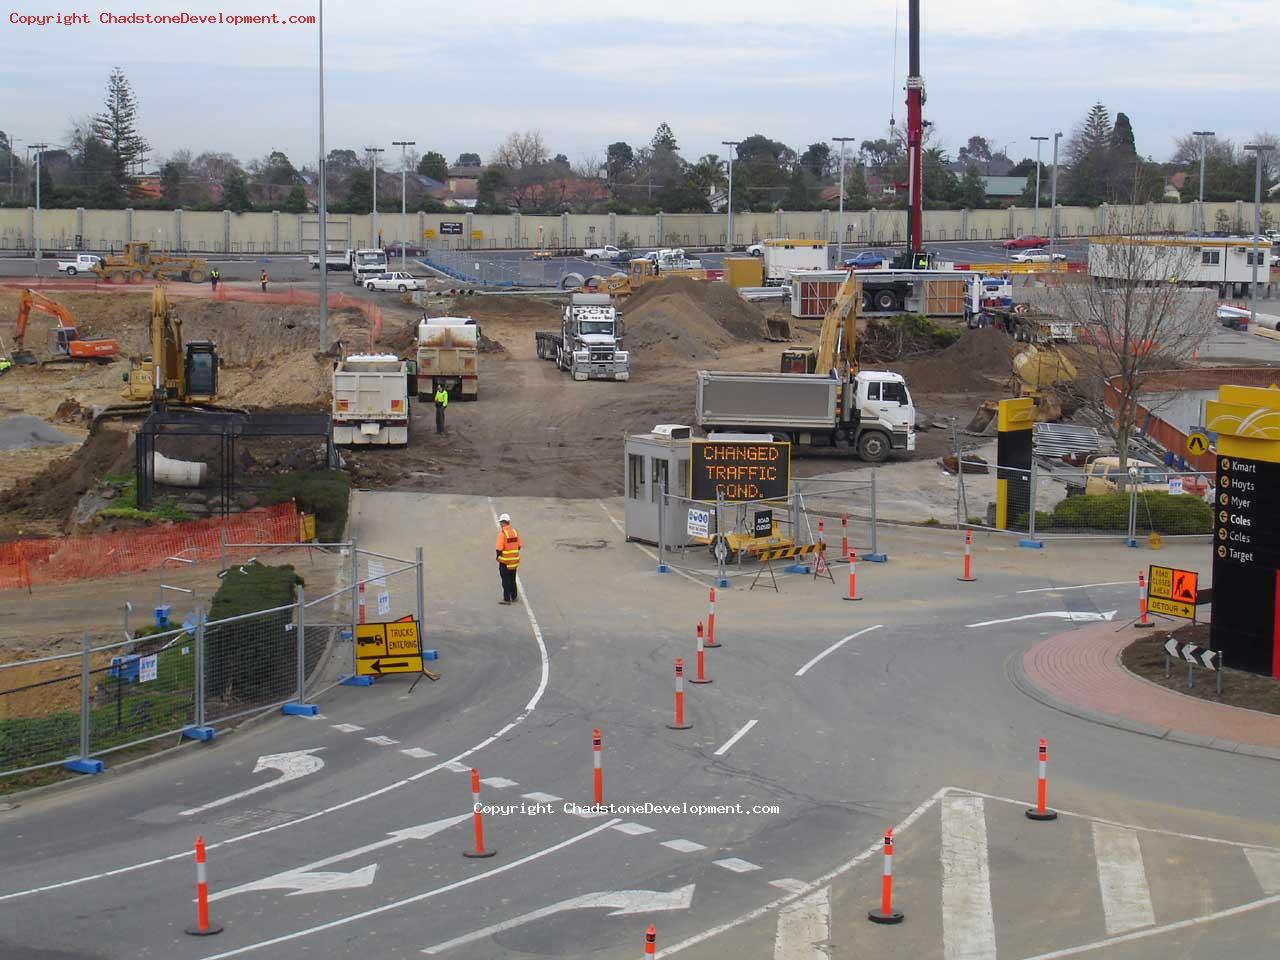 Changed Traffic Condition at roundabout - Chadstone Development Discussions